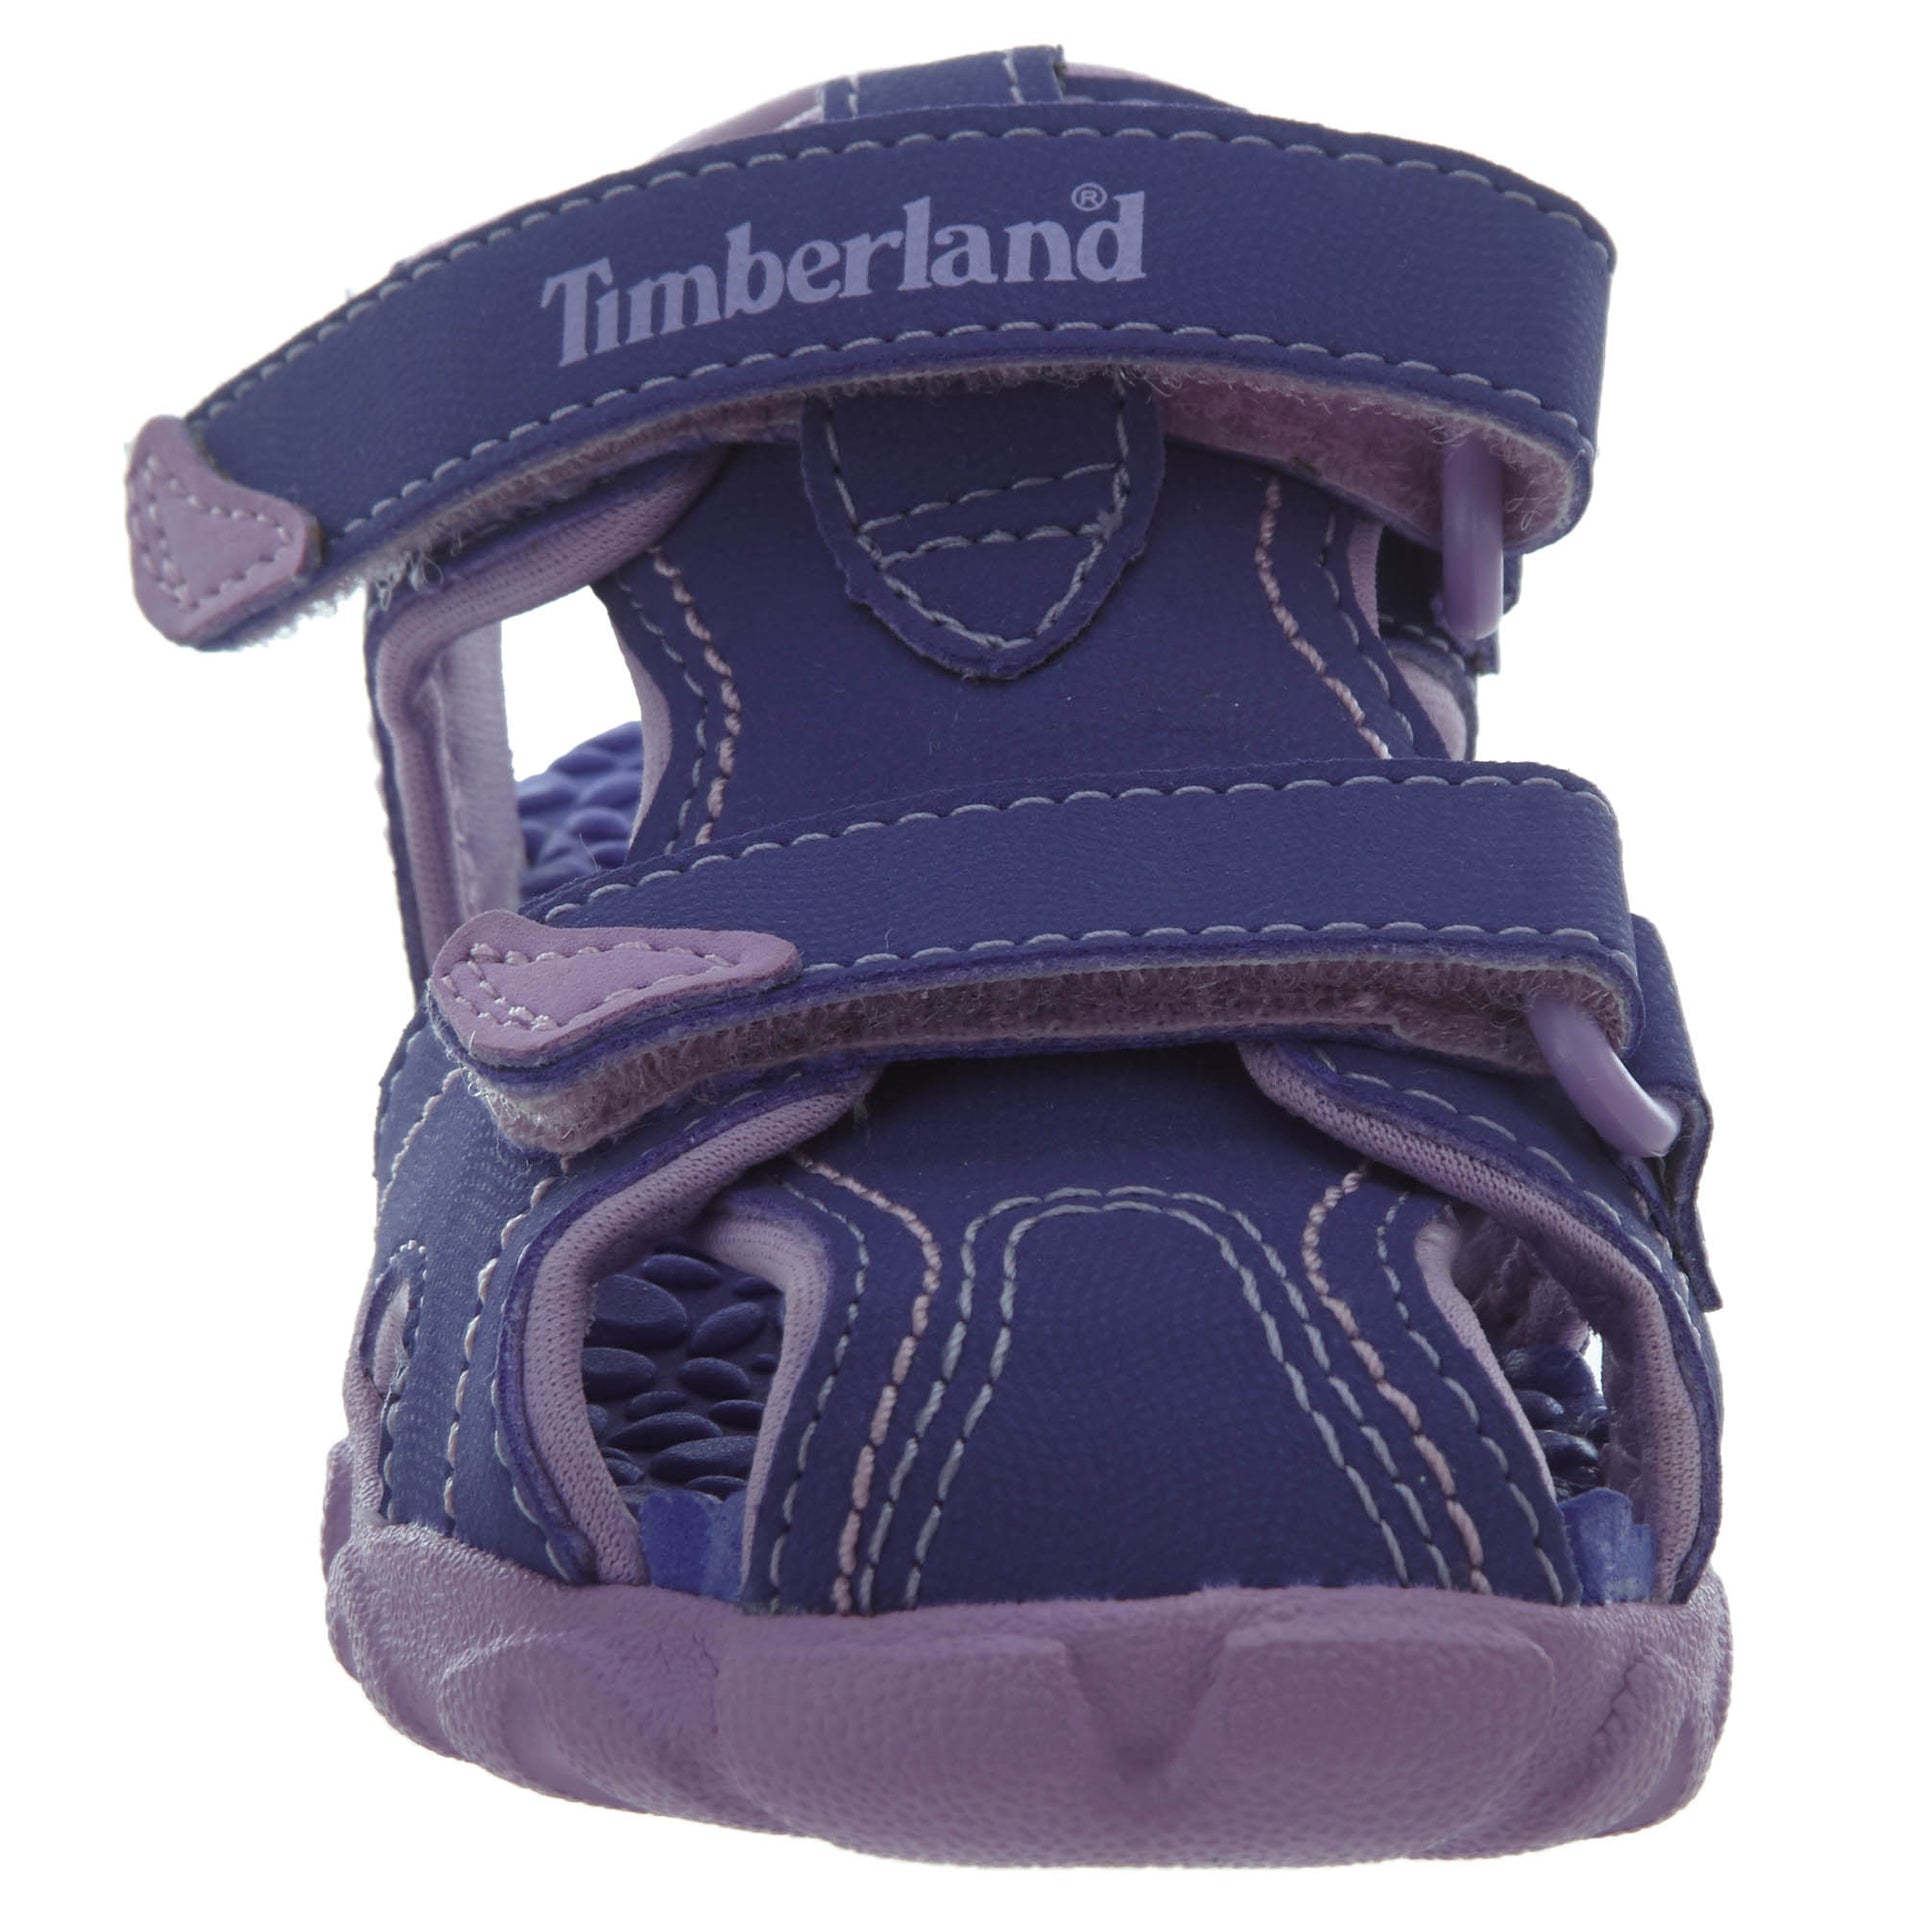 Timberland Adventure Seeker Closed Toe Toddlers Style : 7882r